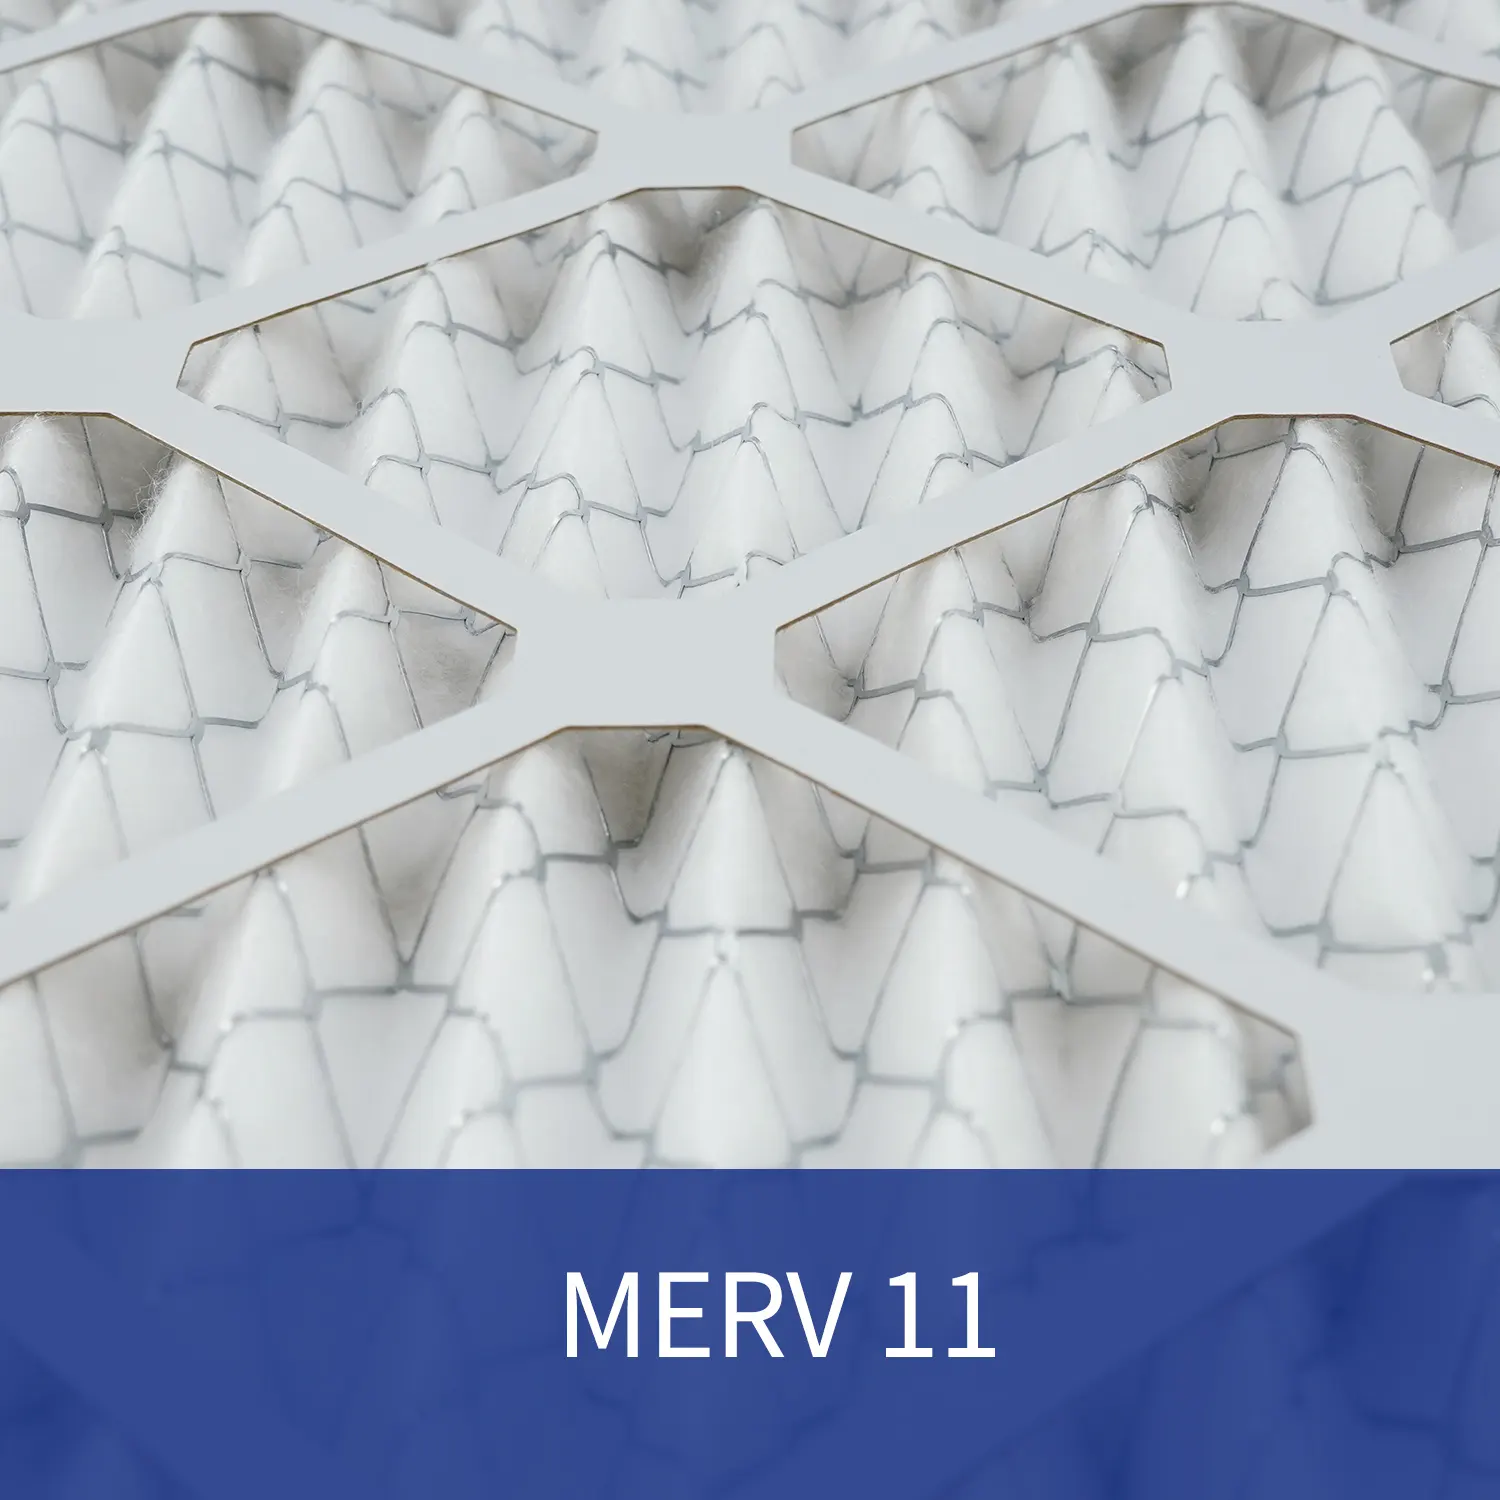 Furnace Filter Professioanl Manufacturer Merv 11 Pleated Ac Furnace Air Filter Primary Disposable Panel Air Filter